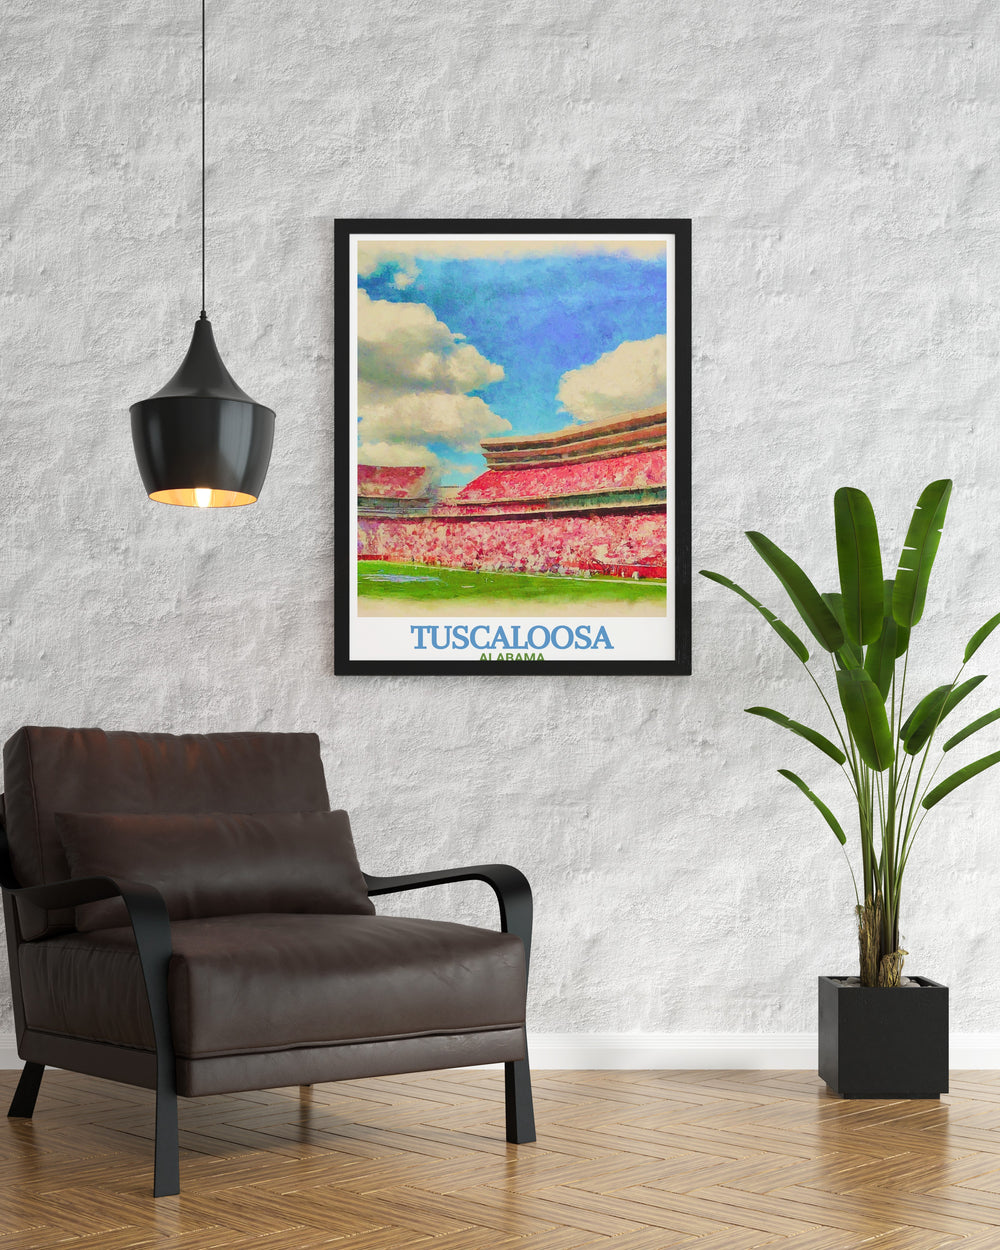 Tuscaloosa Alabama poster showcasing Bryant Denny Stadium and city map ideal for enhancing your home with elegant Tuscaloosa decor and stunning cityscape artwork making a perfect gift for fans and residents of this beautiful city.